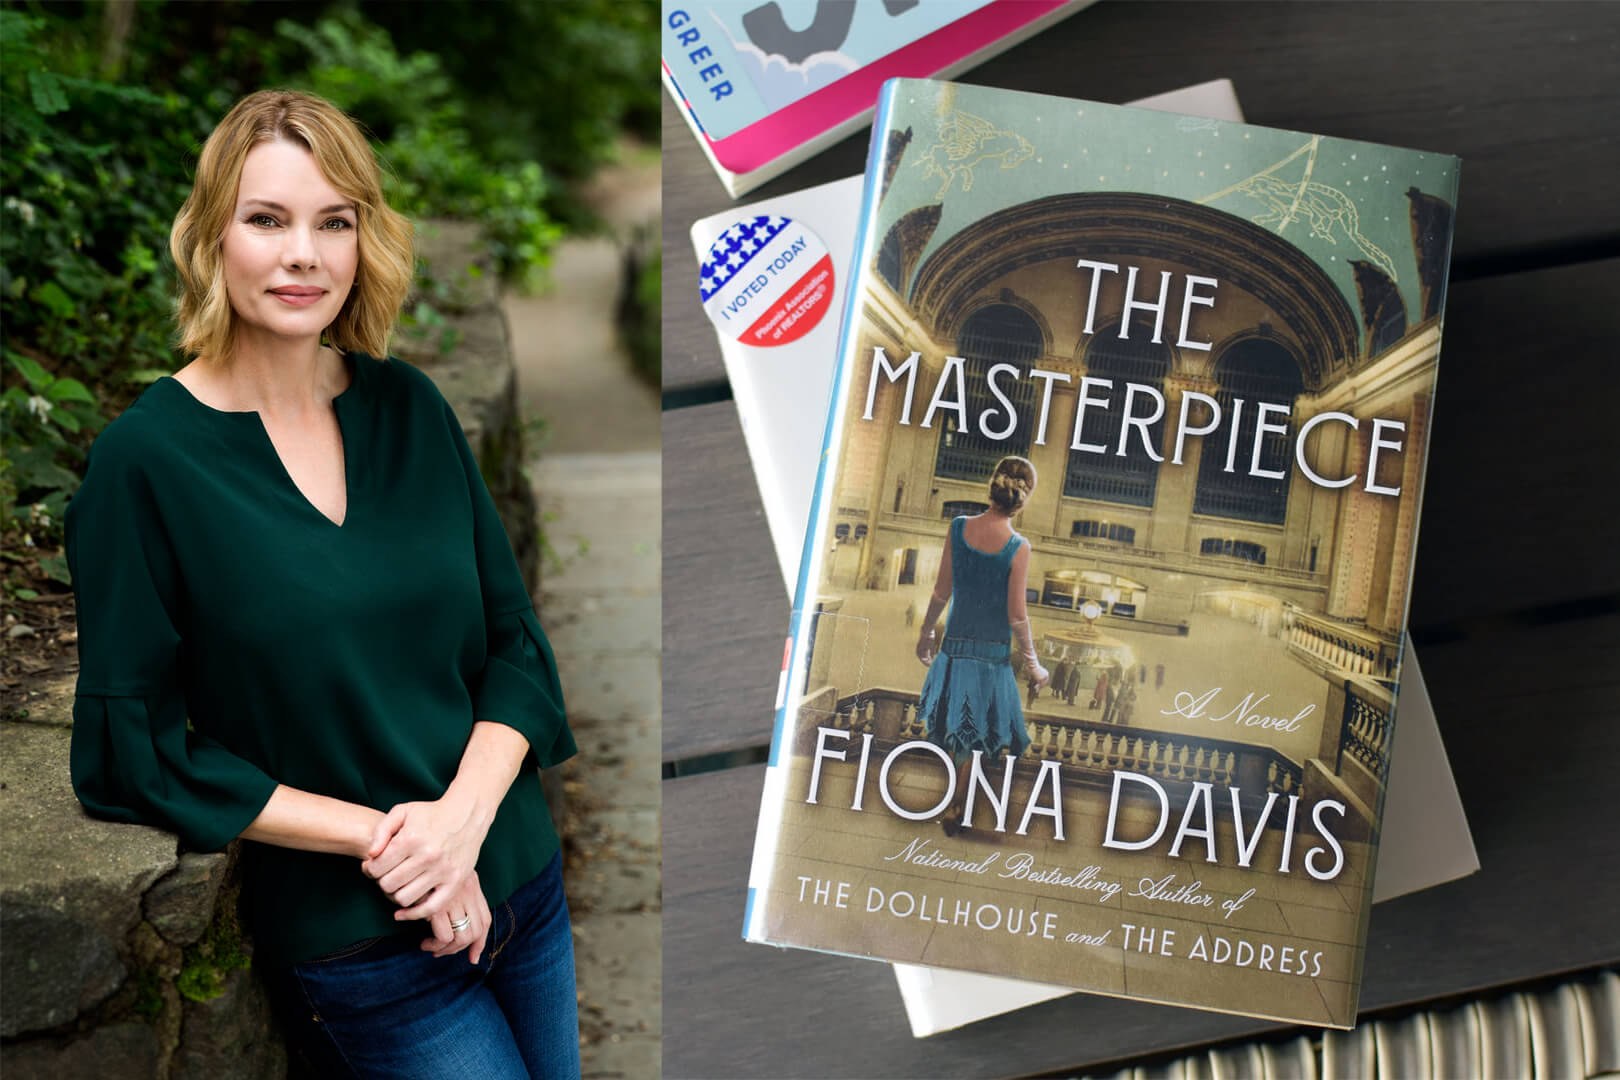 Q&A with Fiona Davis, Author of The Masterpiece